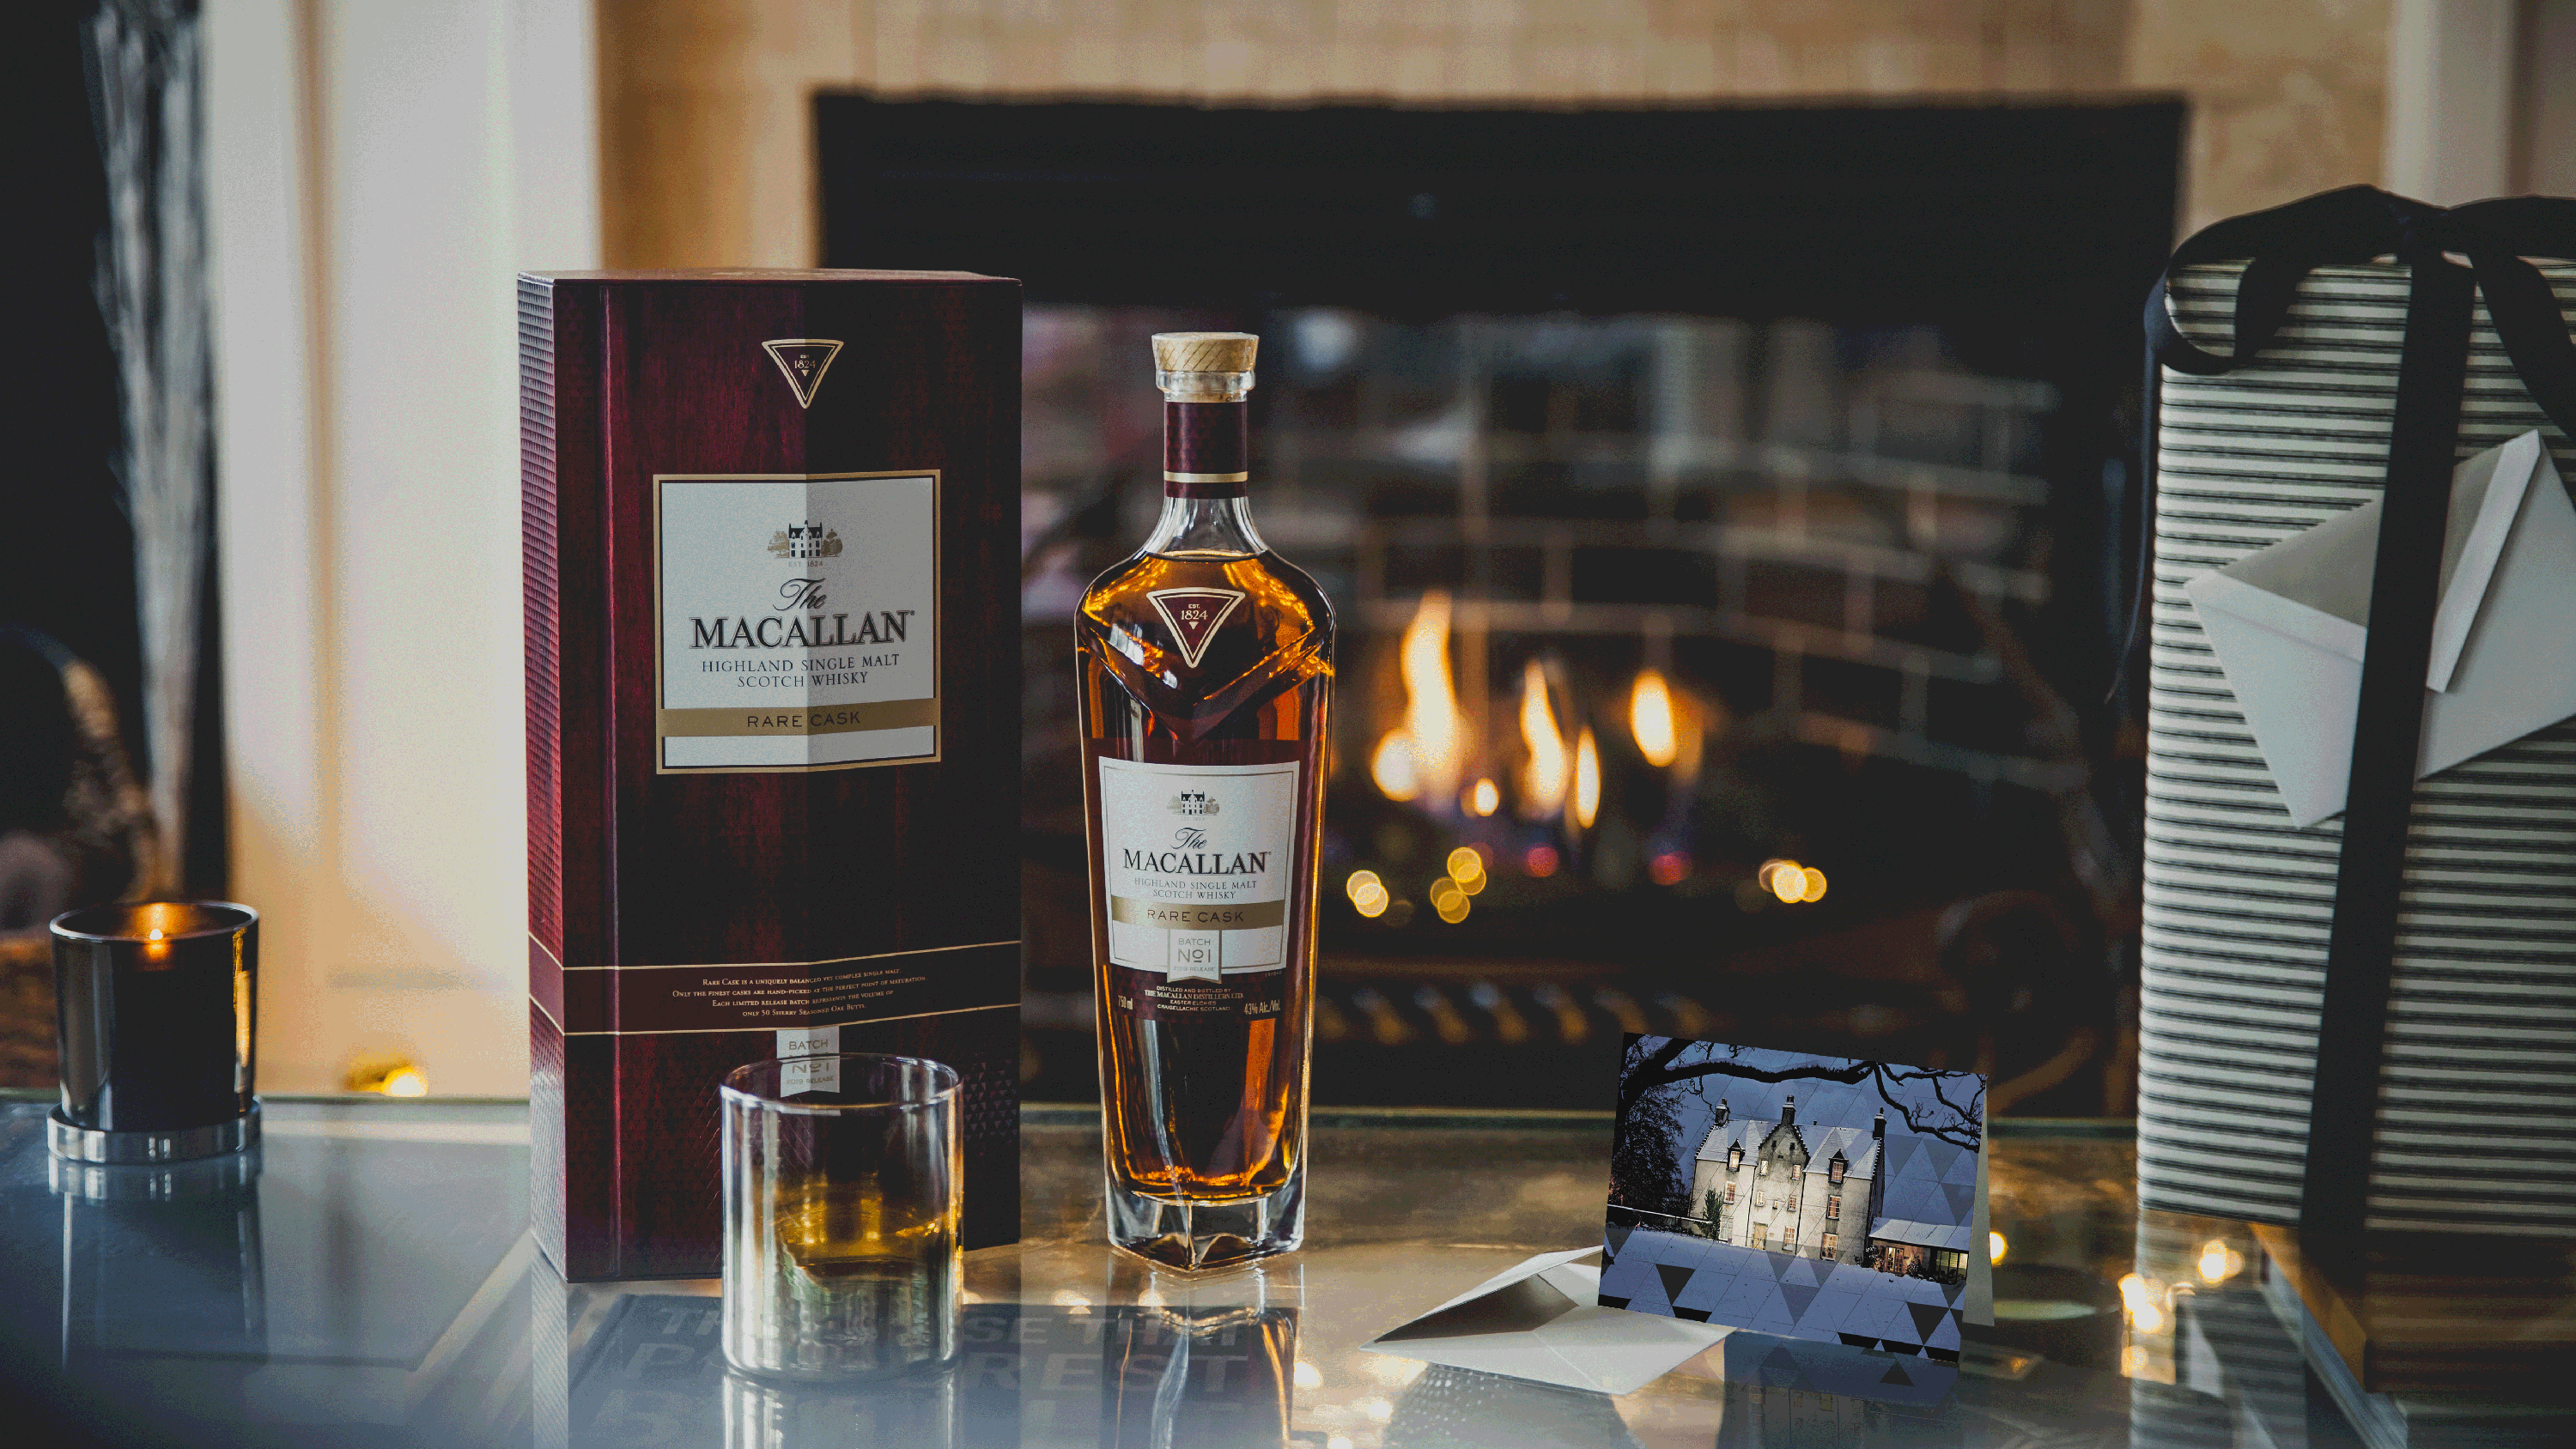 The Macallan Launches Gratitude Charitable Campaign To Help Independent Restaurants